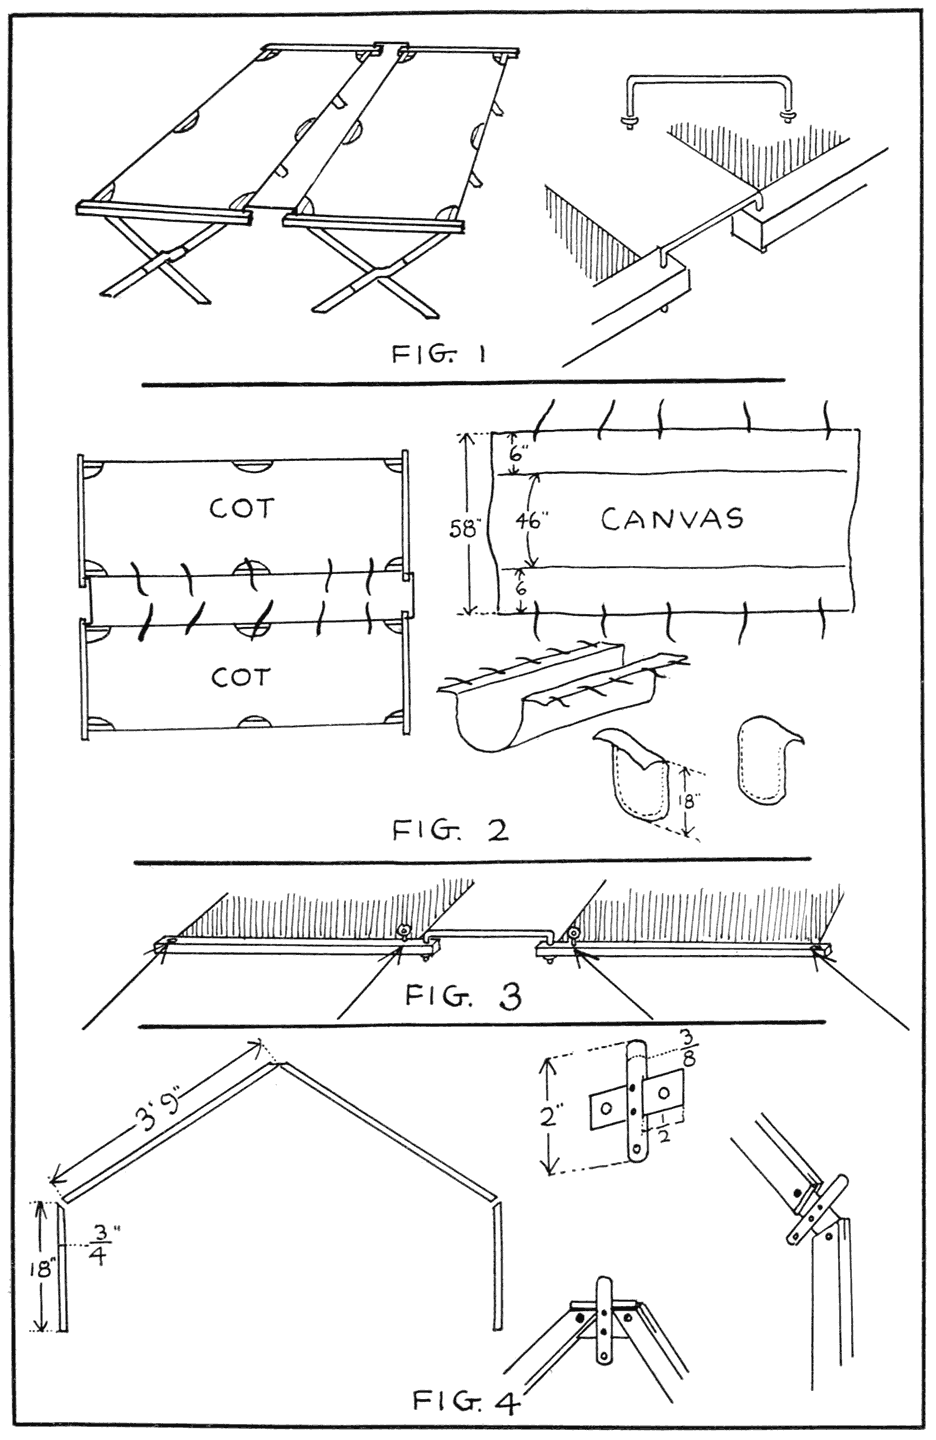 Basis for home-made tenting outfit built by Mr. Frederick W.
Huntington of Brooklyn, N. Y. Note the two standard
army cots, the canvas trough, the sticks of the frame
work, and the design of the joints.